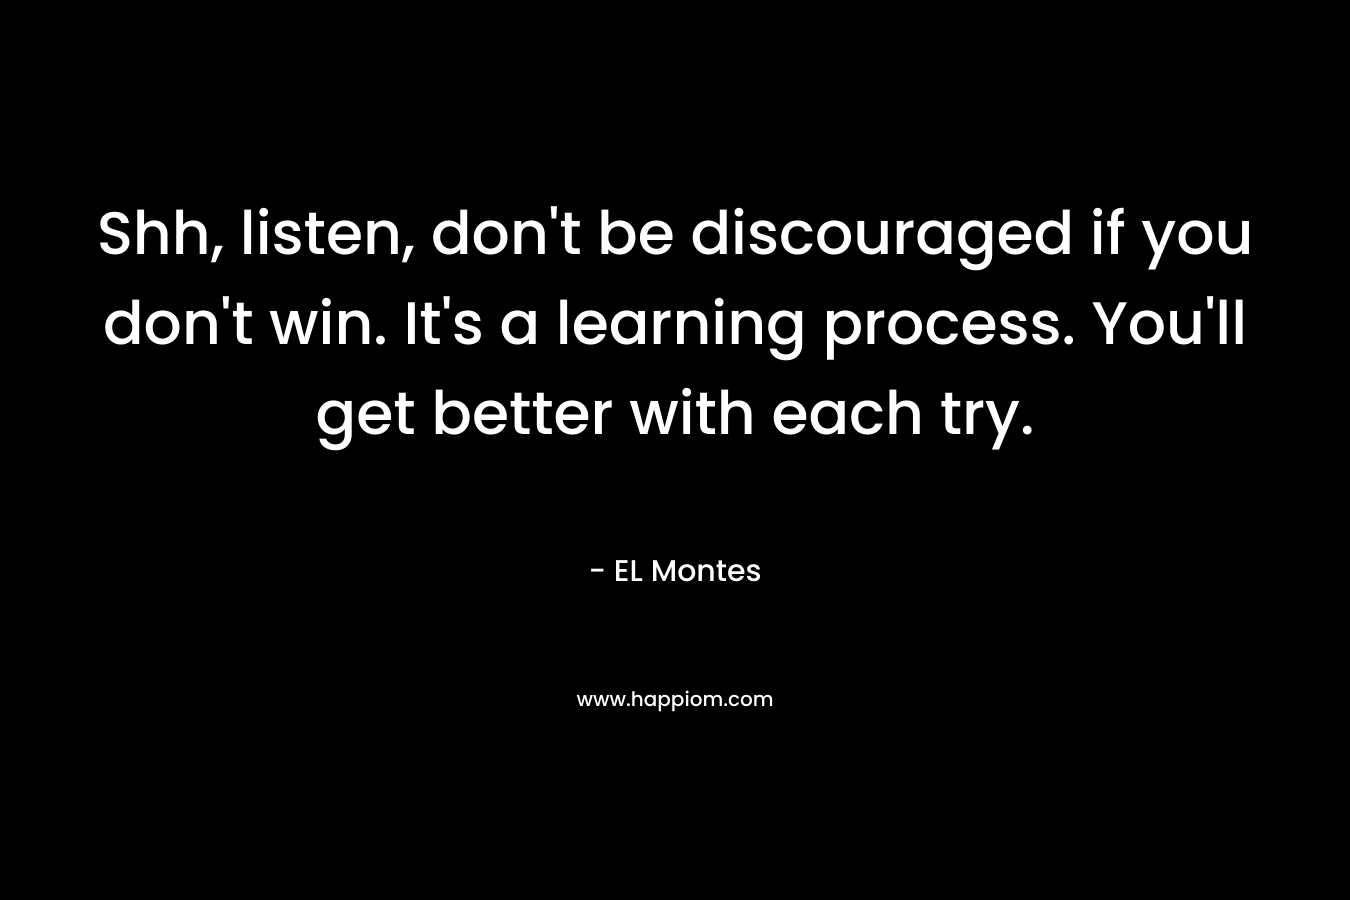 Shh, listen, don’t be discouraged if you don’t win. It’s a learning process. You’ll get better with each try. – EL Montes